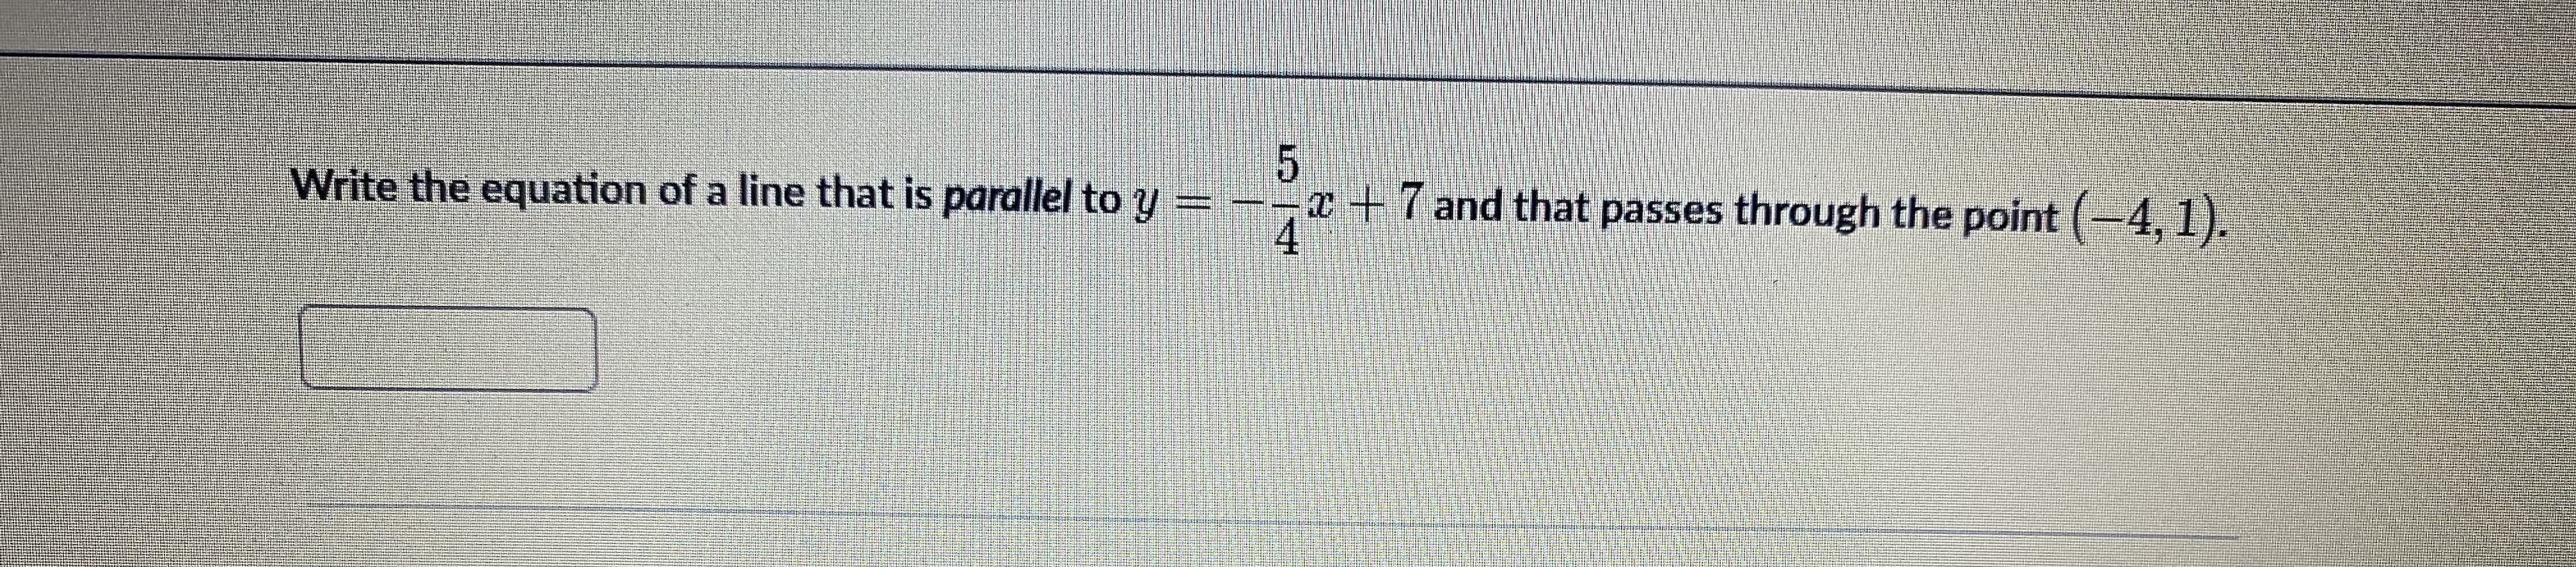 Write the equation of a line that is parallel to y =-2+7 and that passes through the point (-4,1).
4
